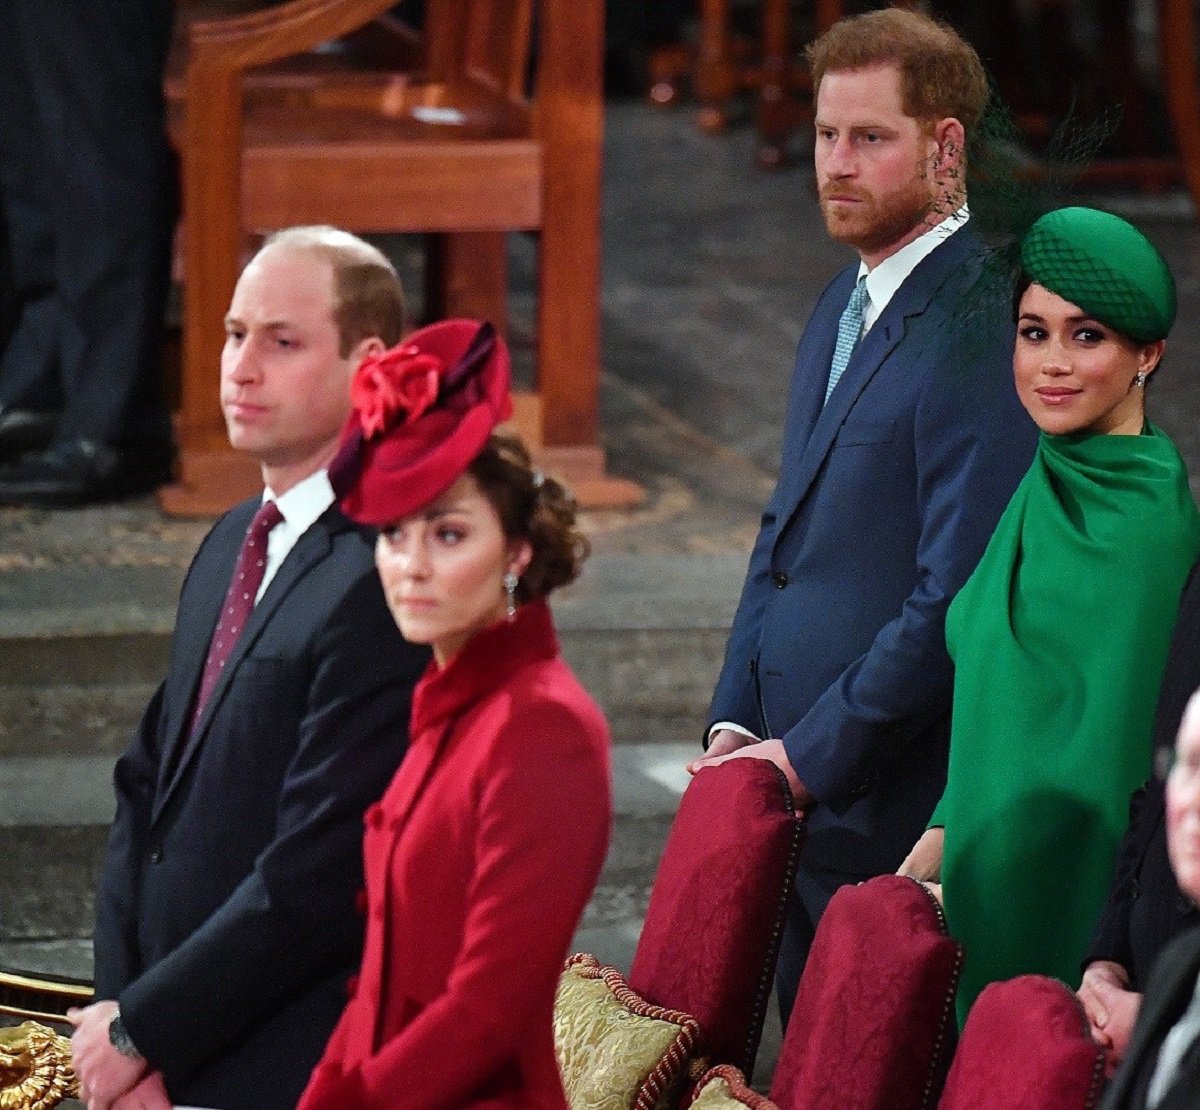 Prince William, Kate Middleton, Prince Harry, and Meghan Markle at the Commonwealth Day Service 2020